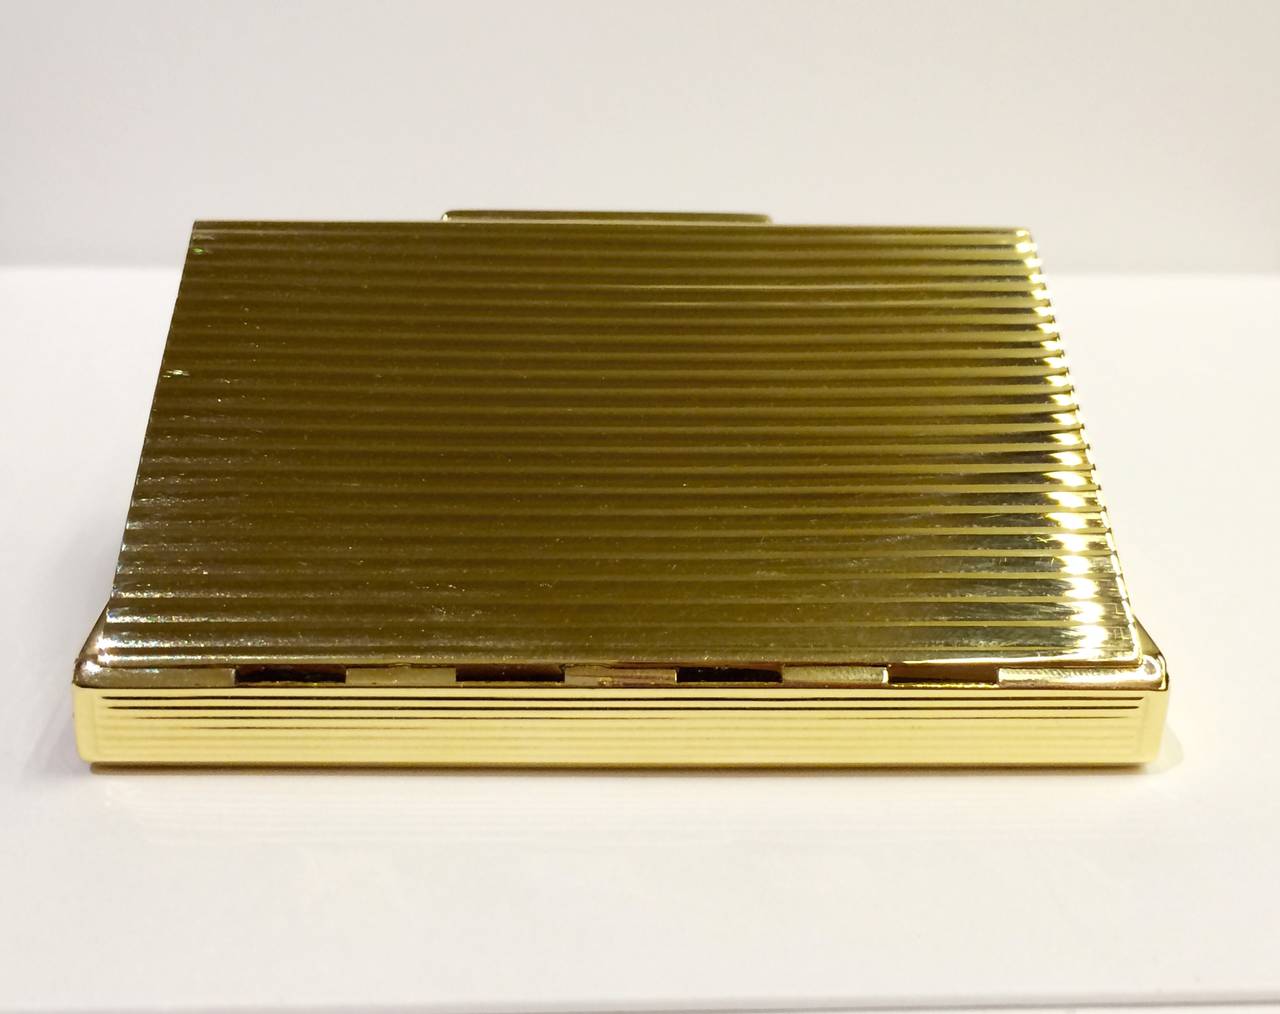 18kt yellow gold rectangular cigarette case, hinge closing, classic style with grooved edges, high polish finish on outside and beautiful matte finish on inside.